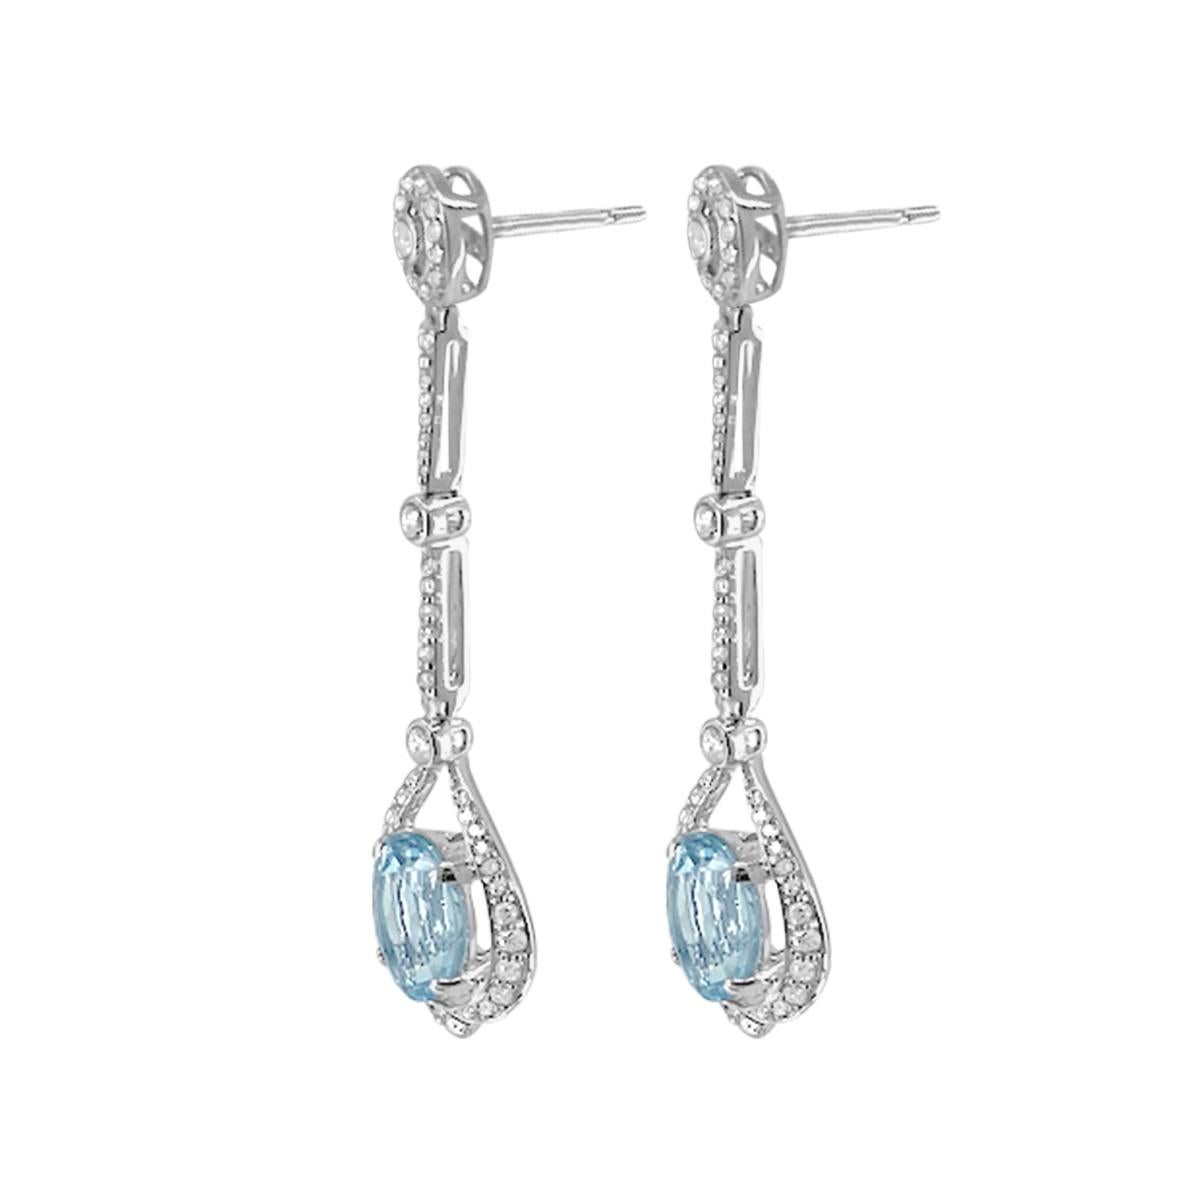 This Elegant And Exquisite Drop/Dangle Earring Will Win The Heart By These Beautiful March Birth Stones. The Eye Is Drawn To The 10x8mm Icy-Blue Aquamarine Centre Stones Of 4.63Cts. Each is Bordered With Diamonds Perfectly Settled In 14K White Gold.